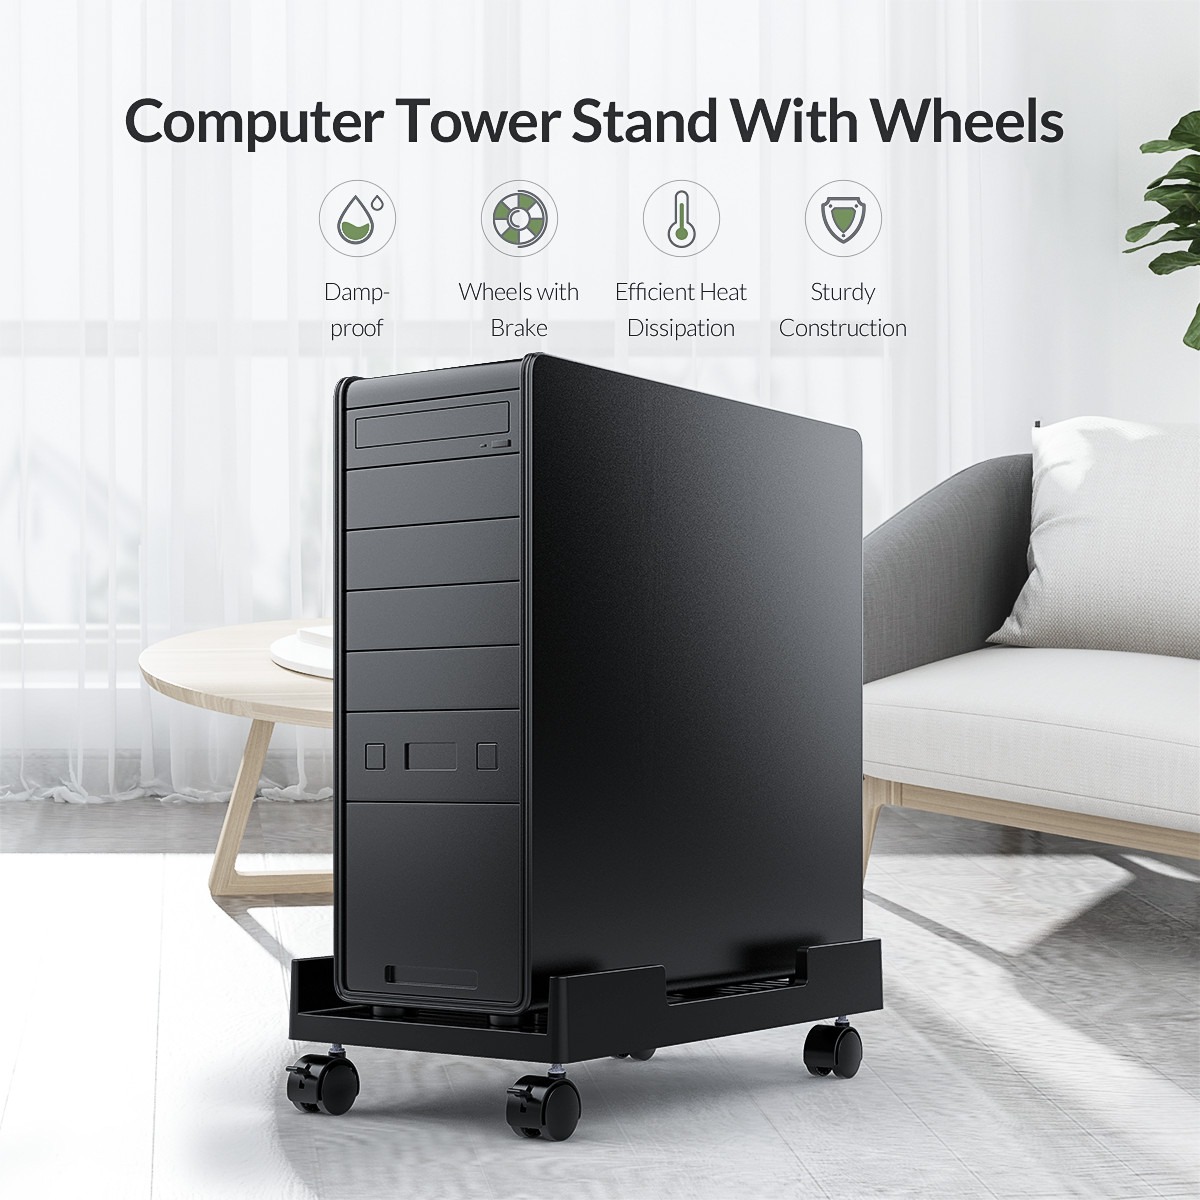 ORICO CPU PC Tower Case Holder Bracket Stand with Rotating Wheels, Base  Ventilation Holes, 20KG Max Load, High-side Edges for Computer Desktop  System